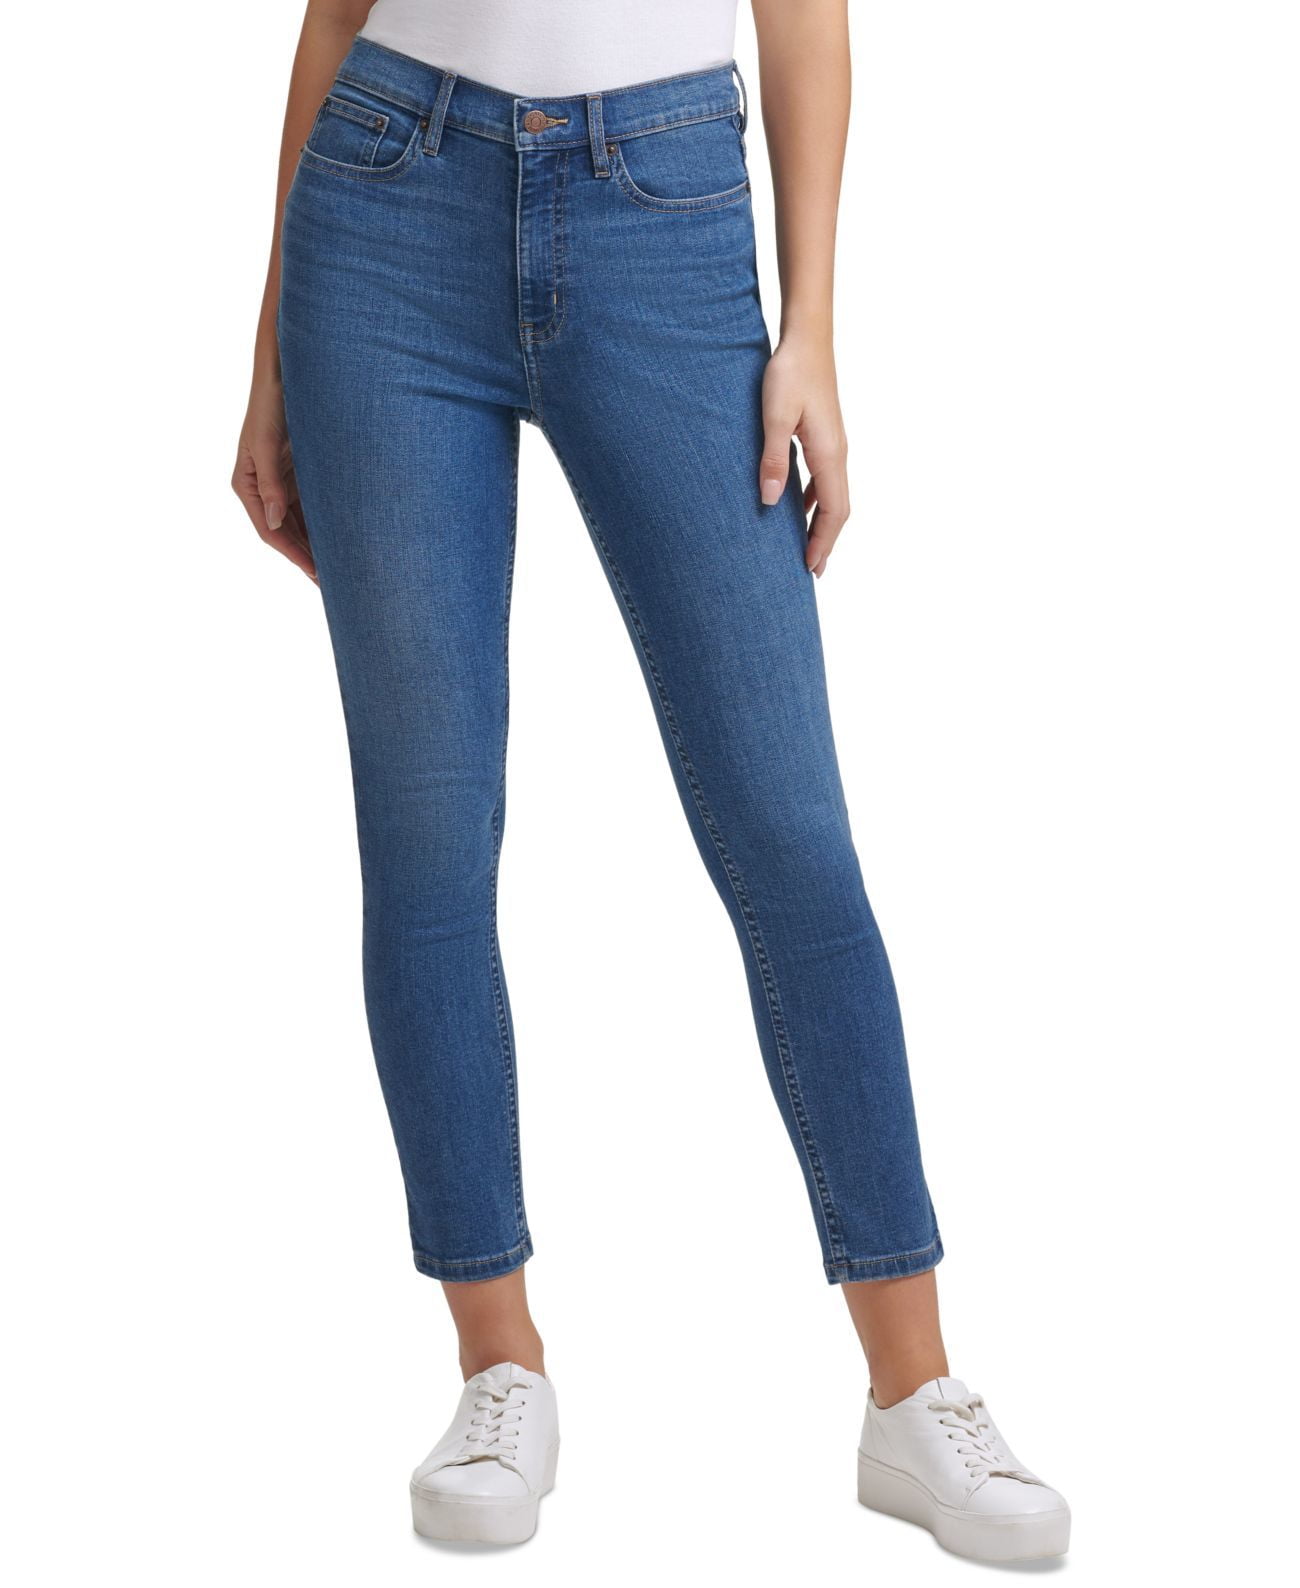 Calvin Klein Jeans High-Rise Skinny, Ankle Jeans, Blue, 30 